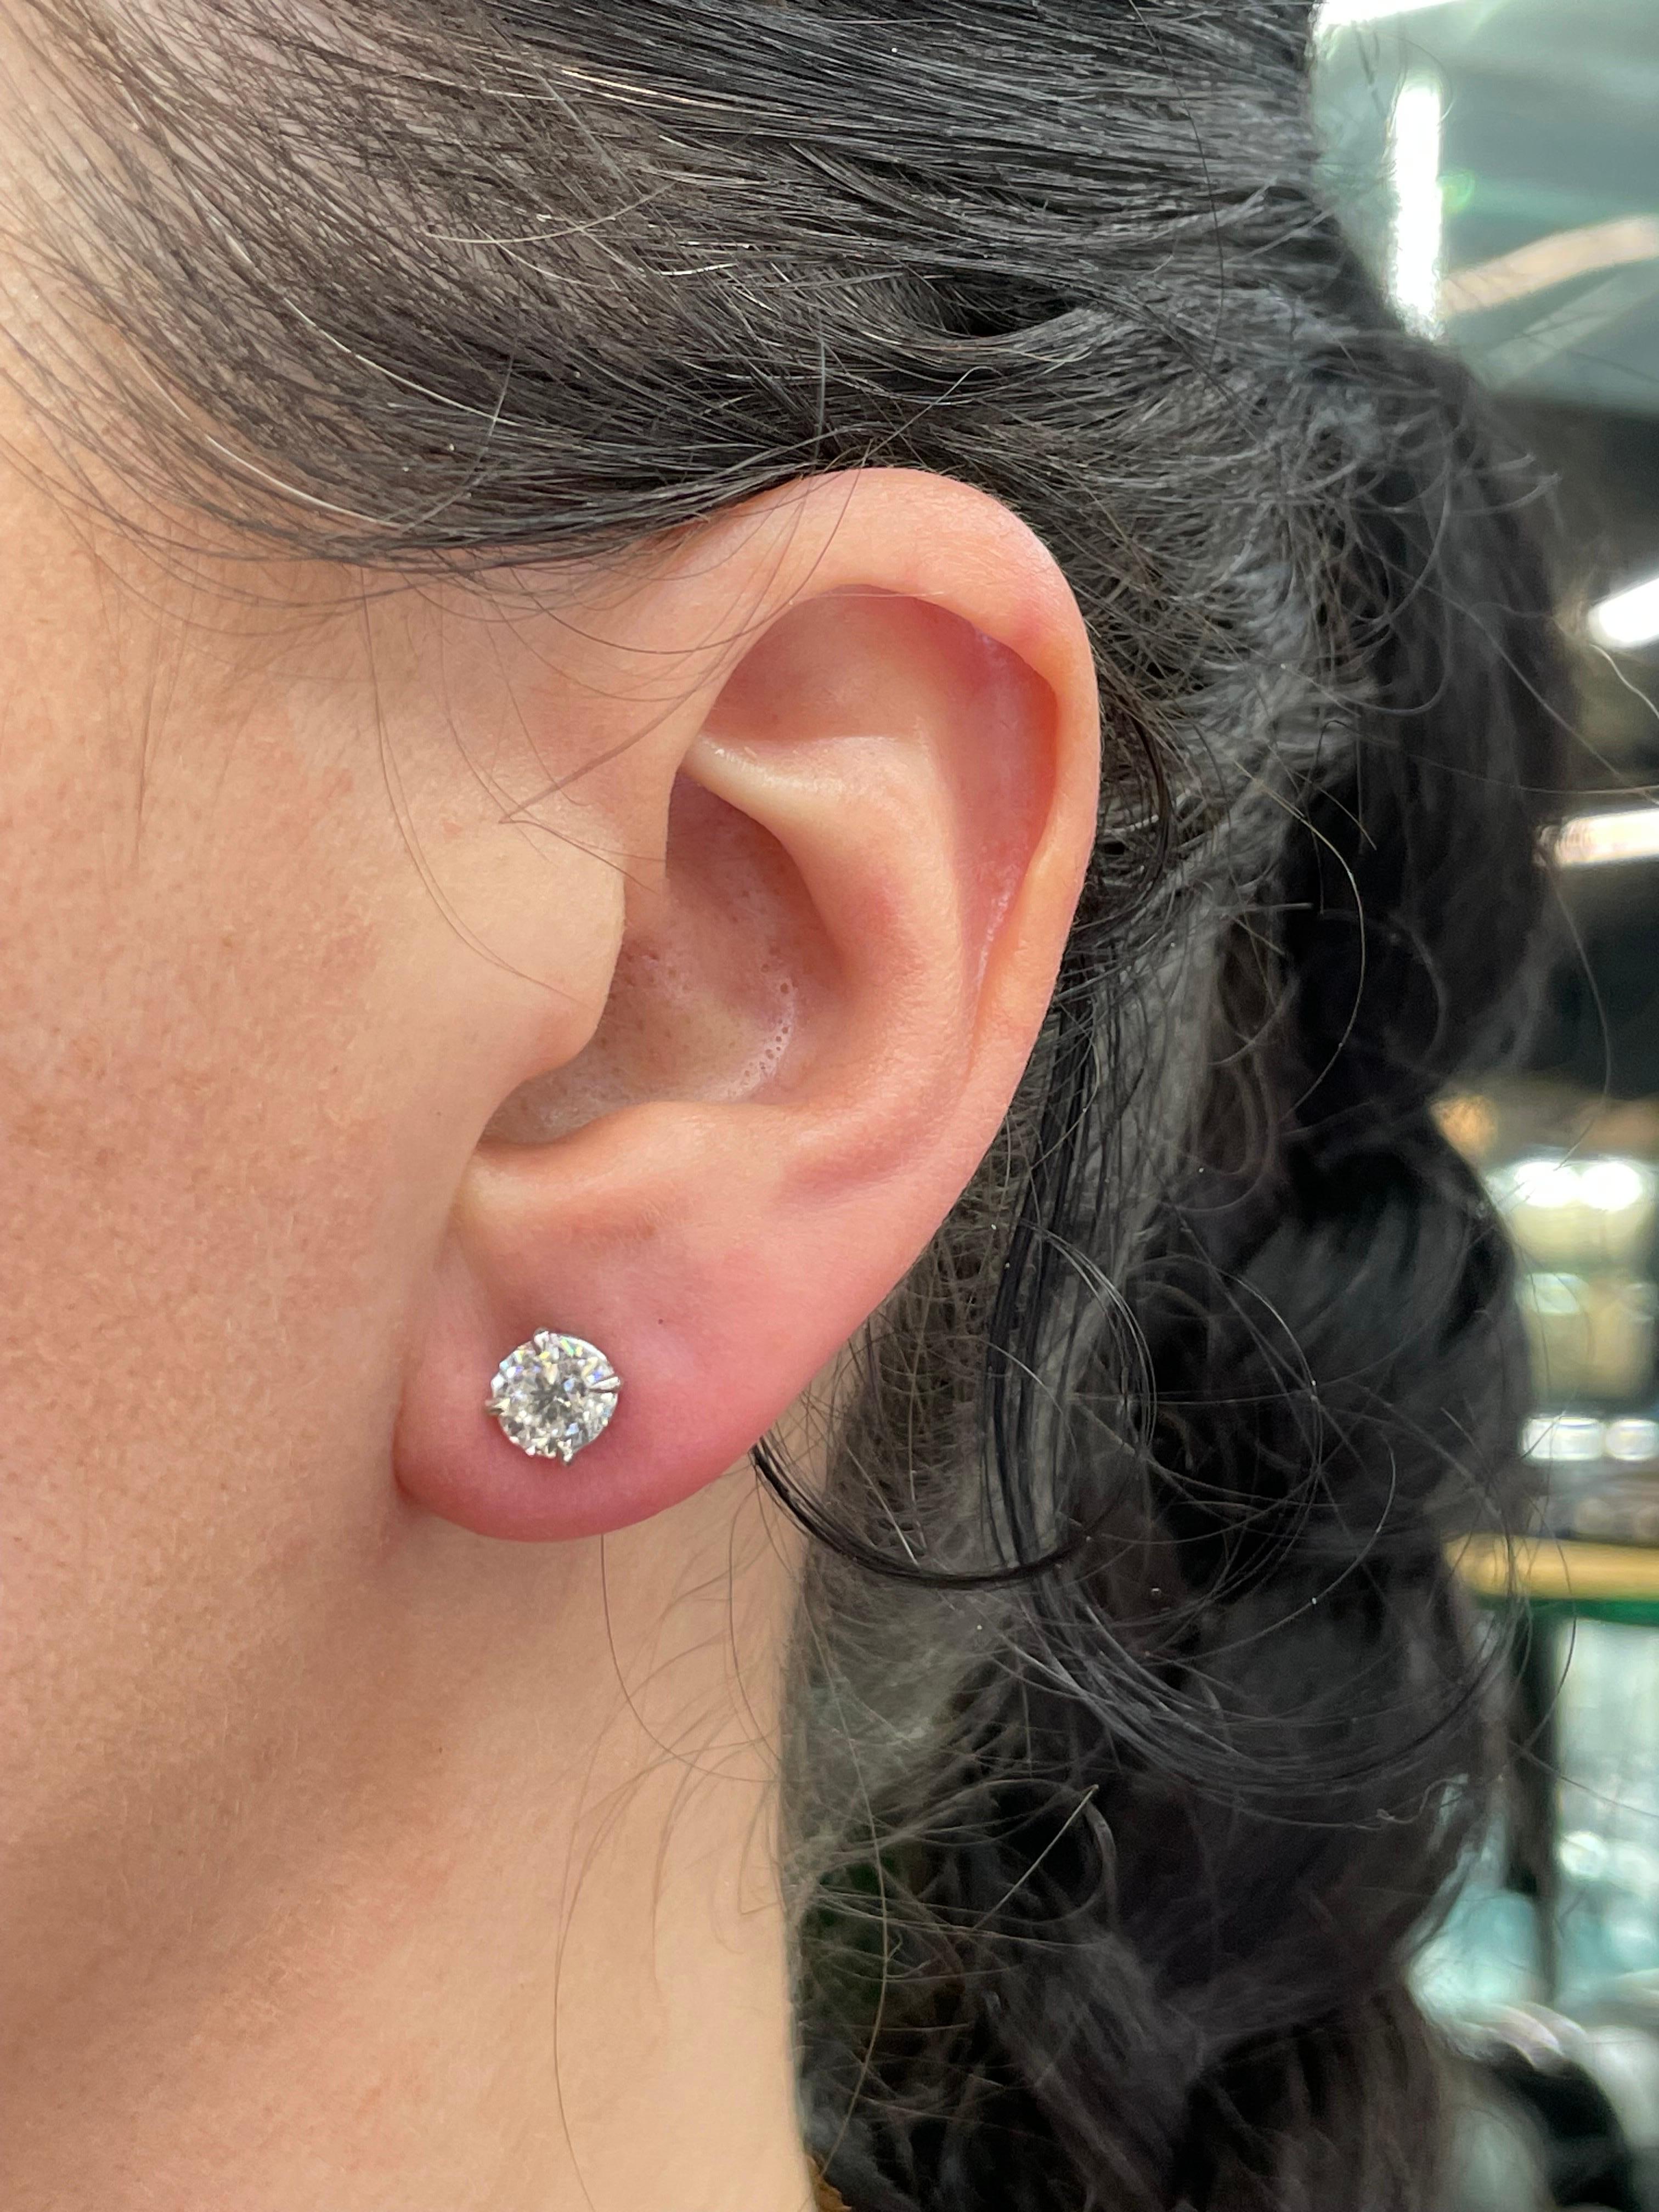 Diamond stud earrings weighing 2.02 Carats, in 14 Karat White Gold 3 Prong Basket Setting.
Color H
Clarity I1

Setting can be changed to a Basket, Martini or Champagne/ 3 or 4 Prong/ 14 or 18 Karat.

DM for more Info & Videos
More Diamond Studs